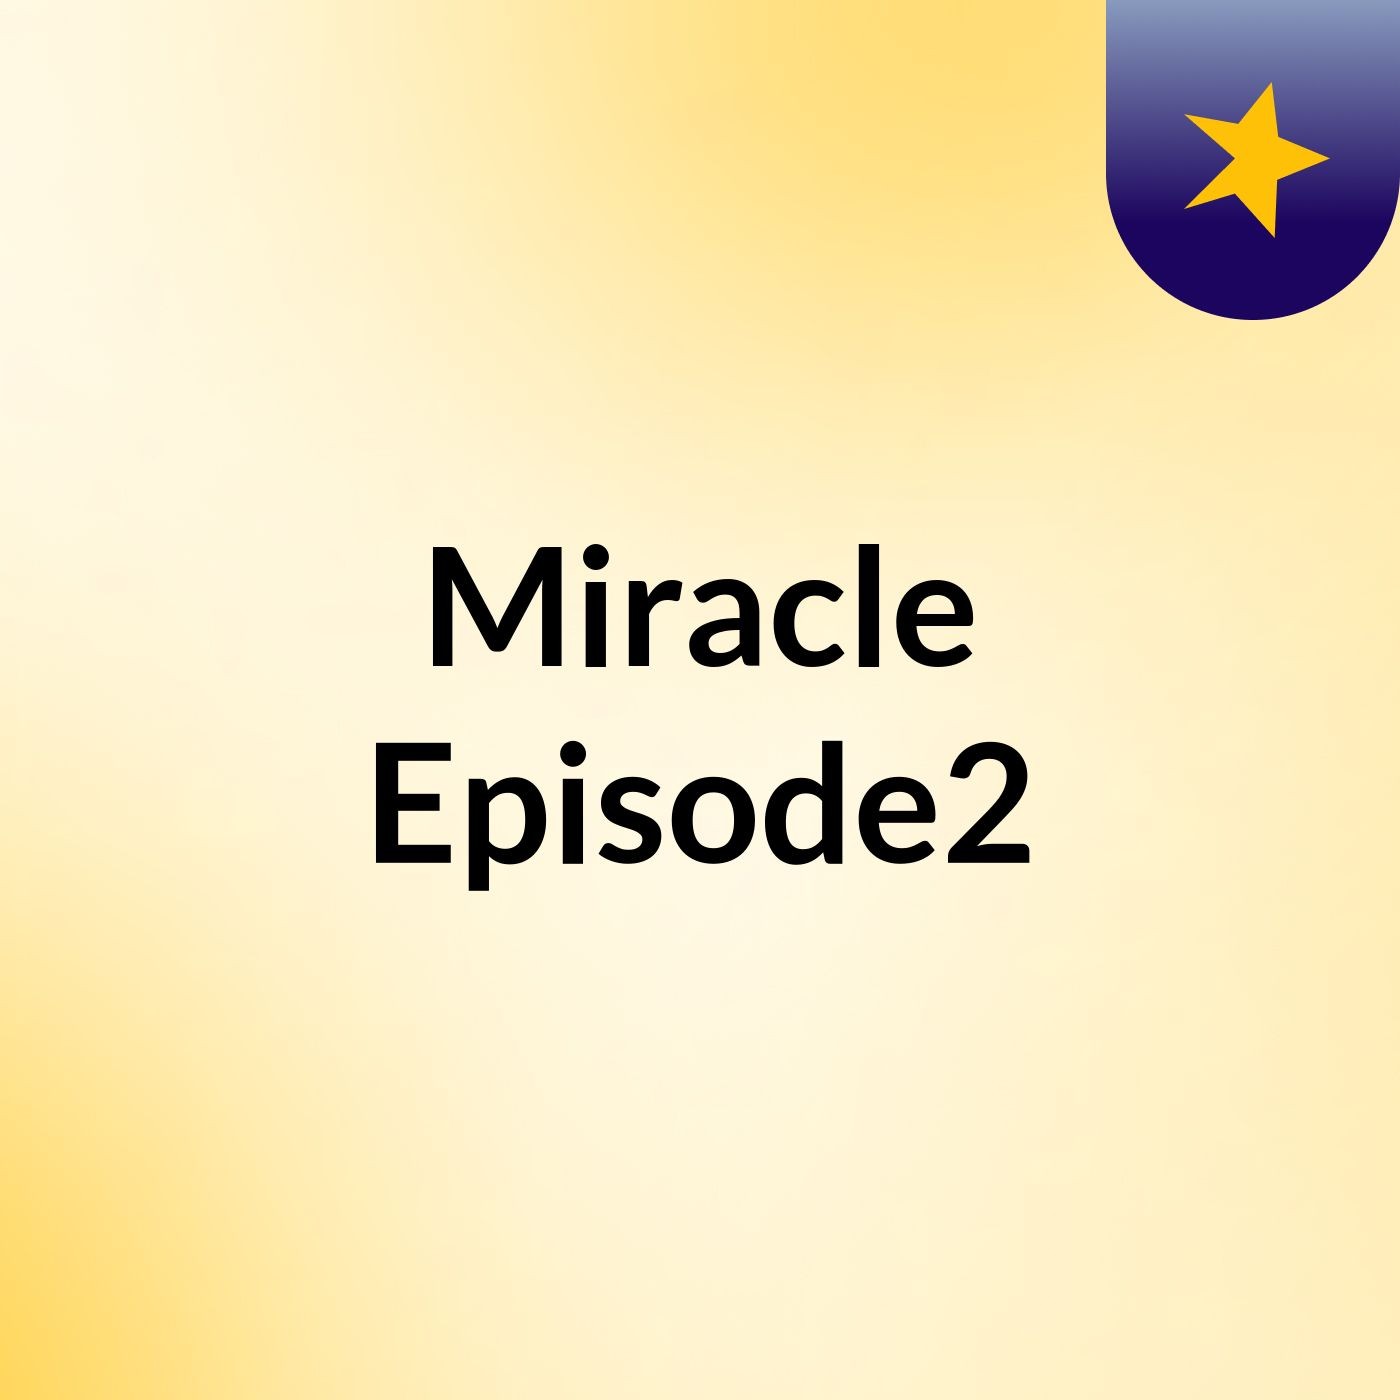 Episode 1 - Miracle Episode2